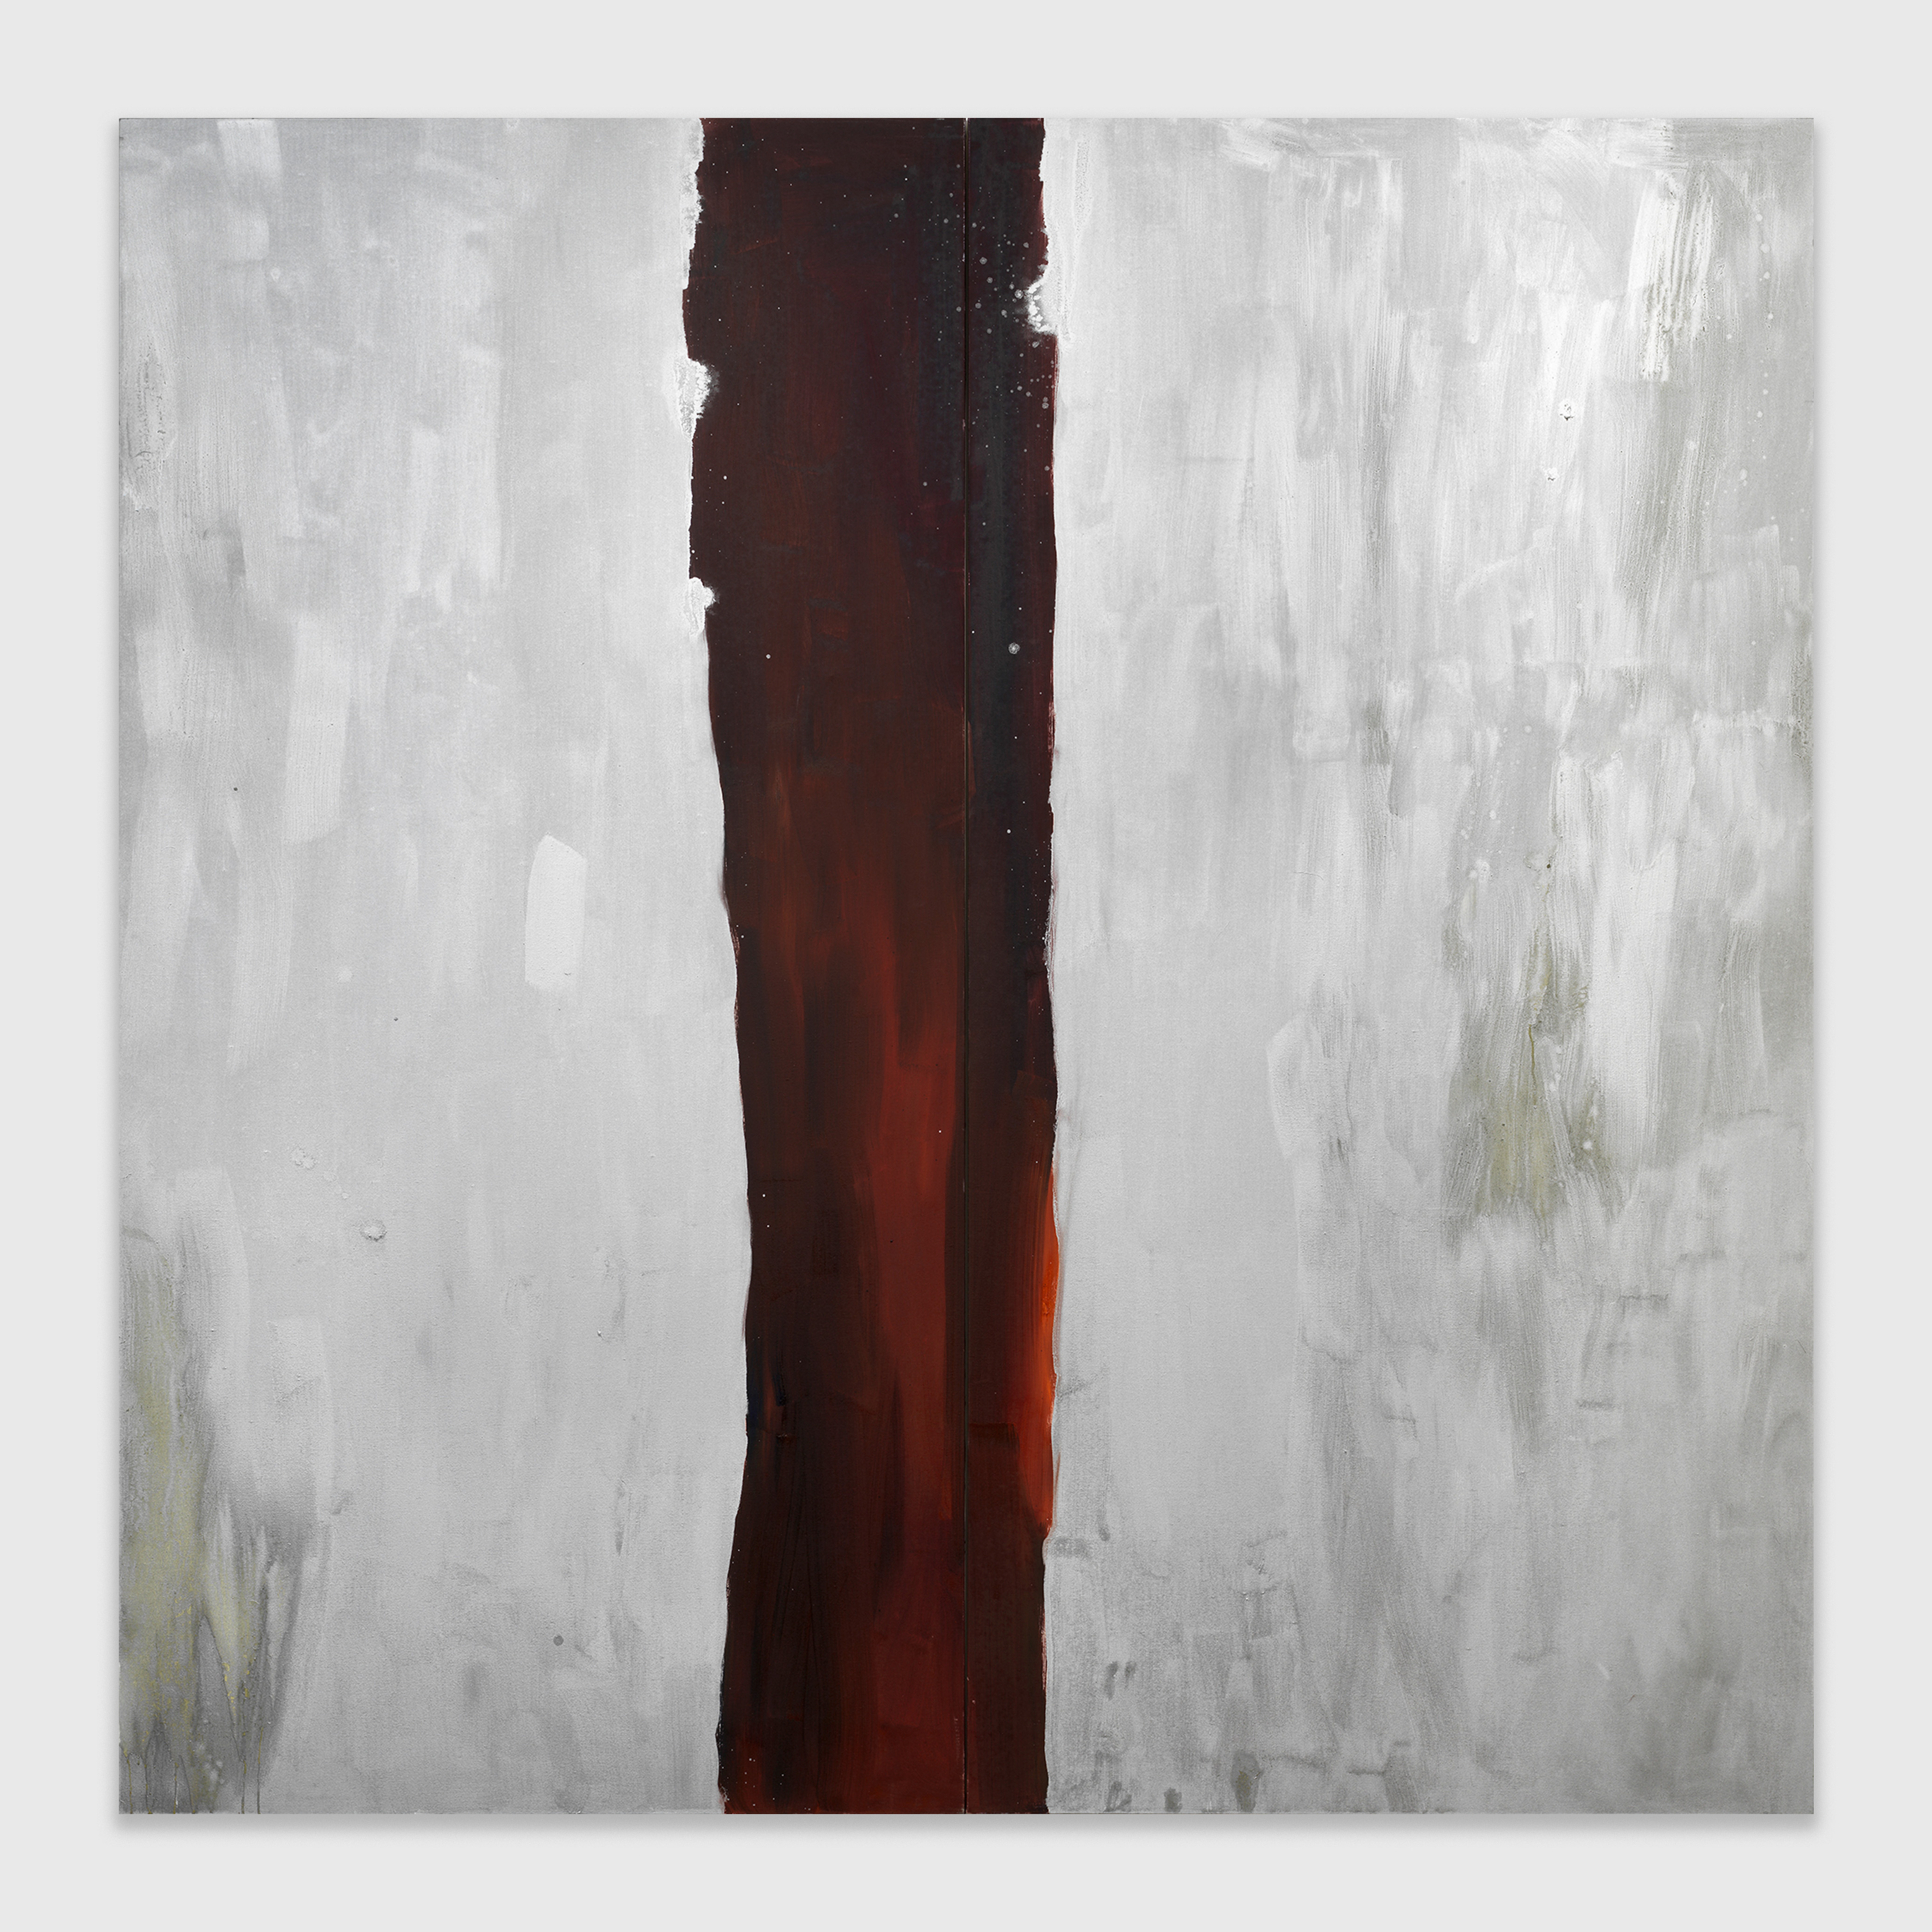 Jane Swavely, Silver OID #6, 2022, Oil on canvas, 90 x 90 in.